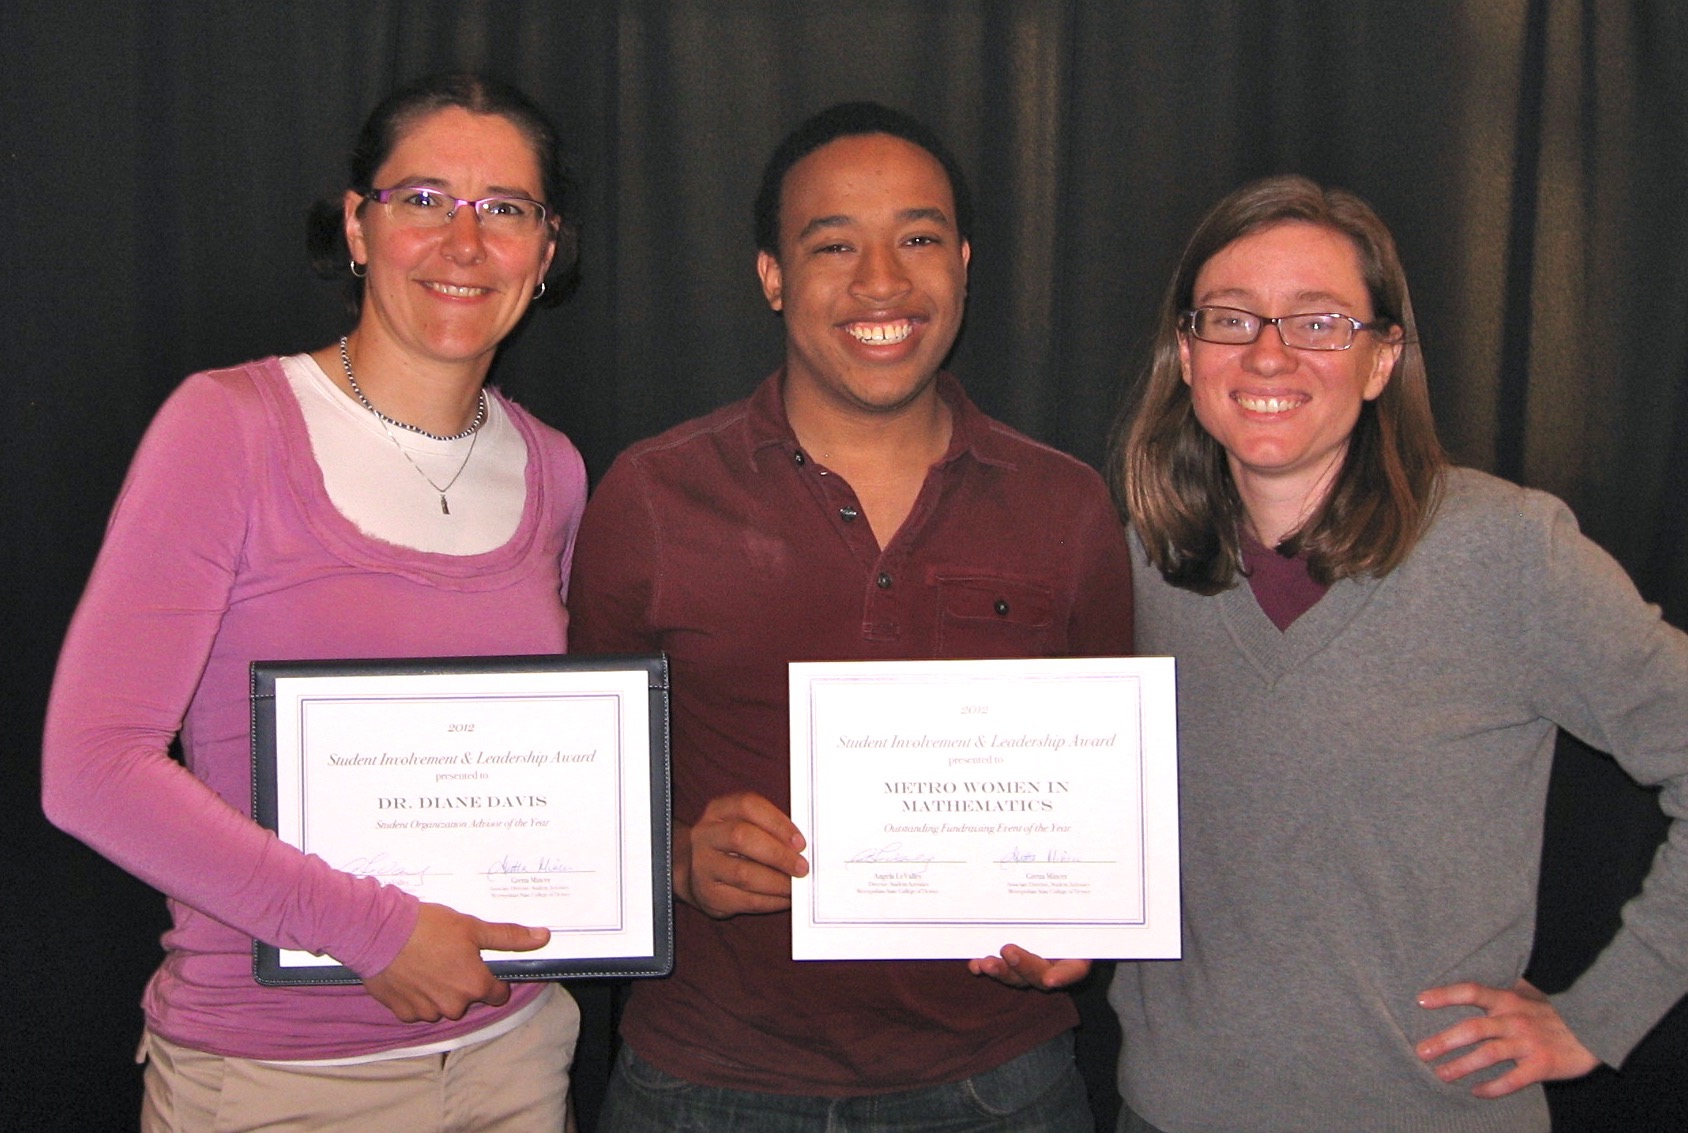 Three people standing and holding certificates